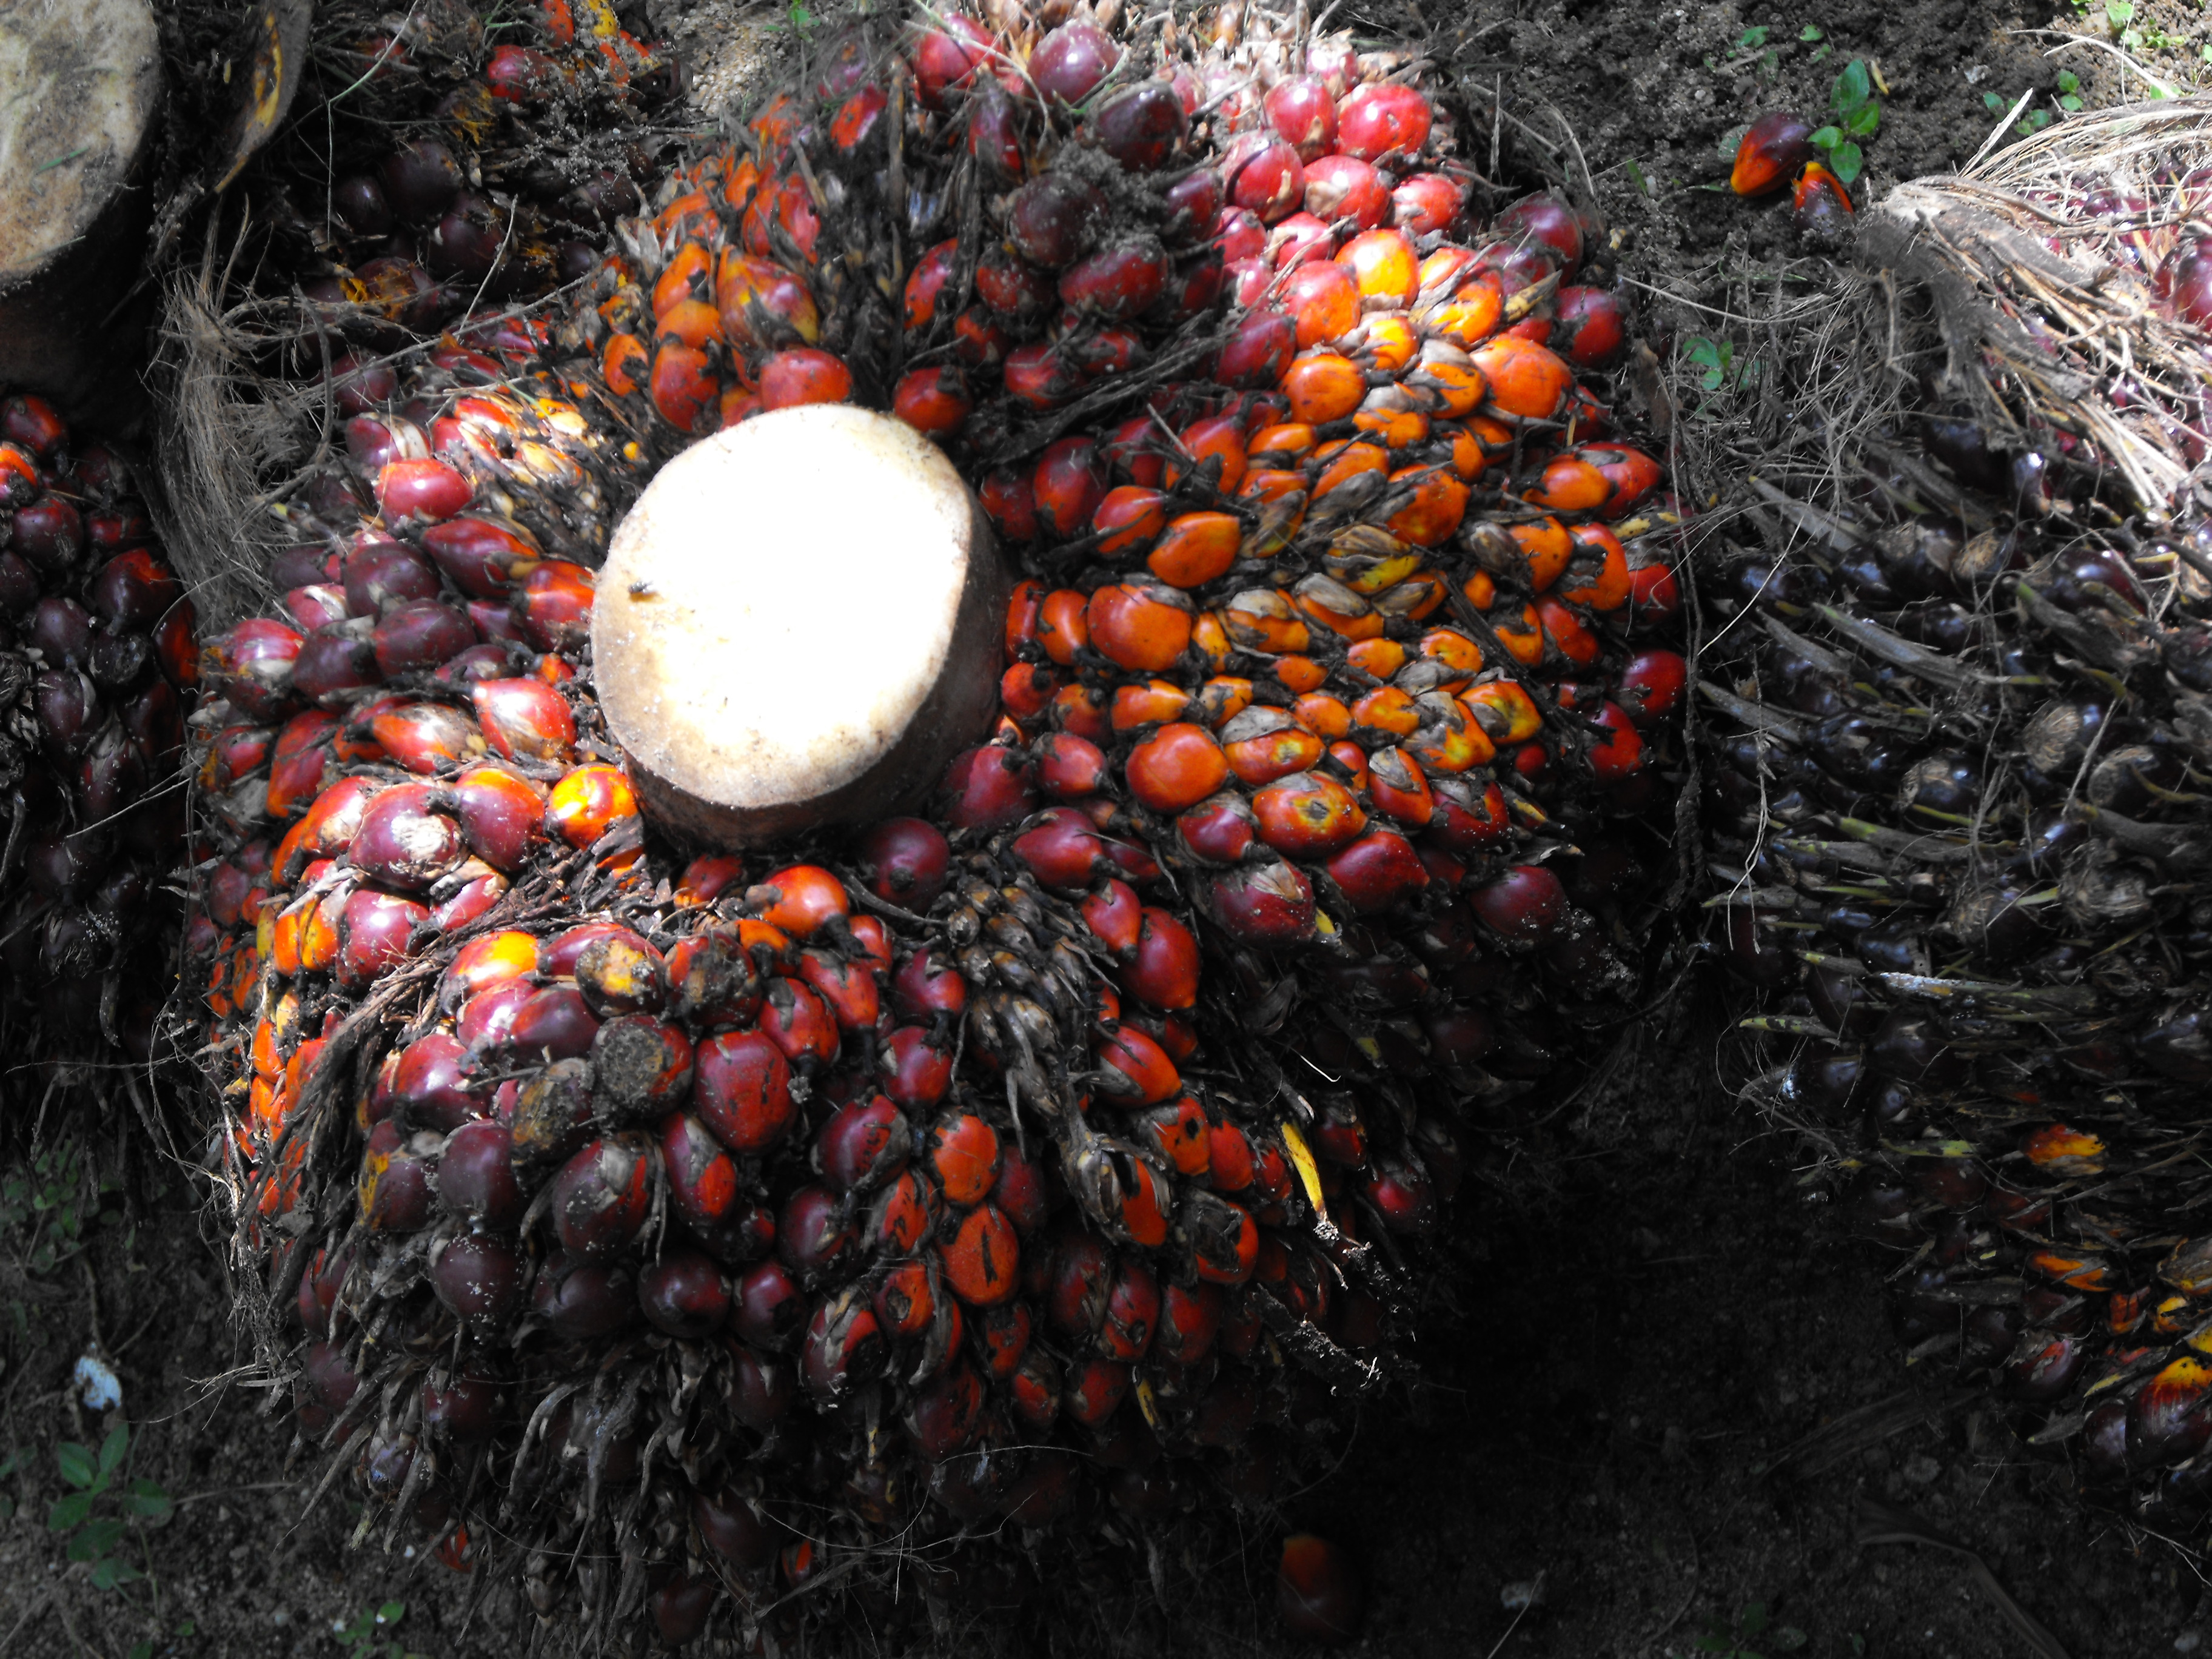 Palm oil production in Indonesia - Wikipedia